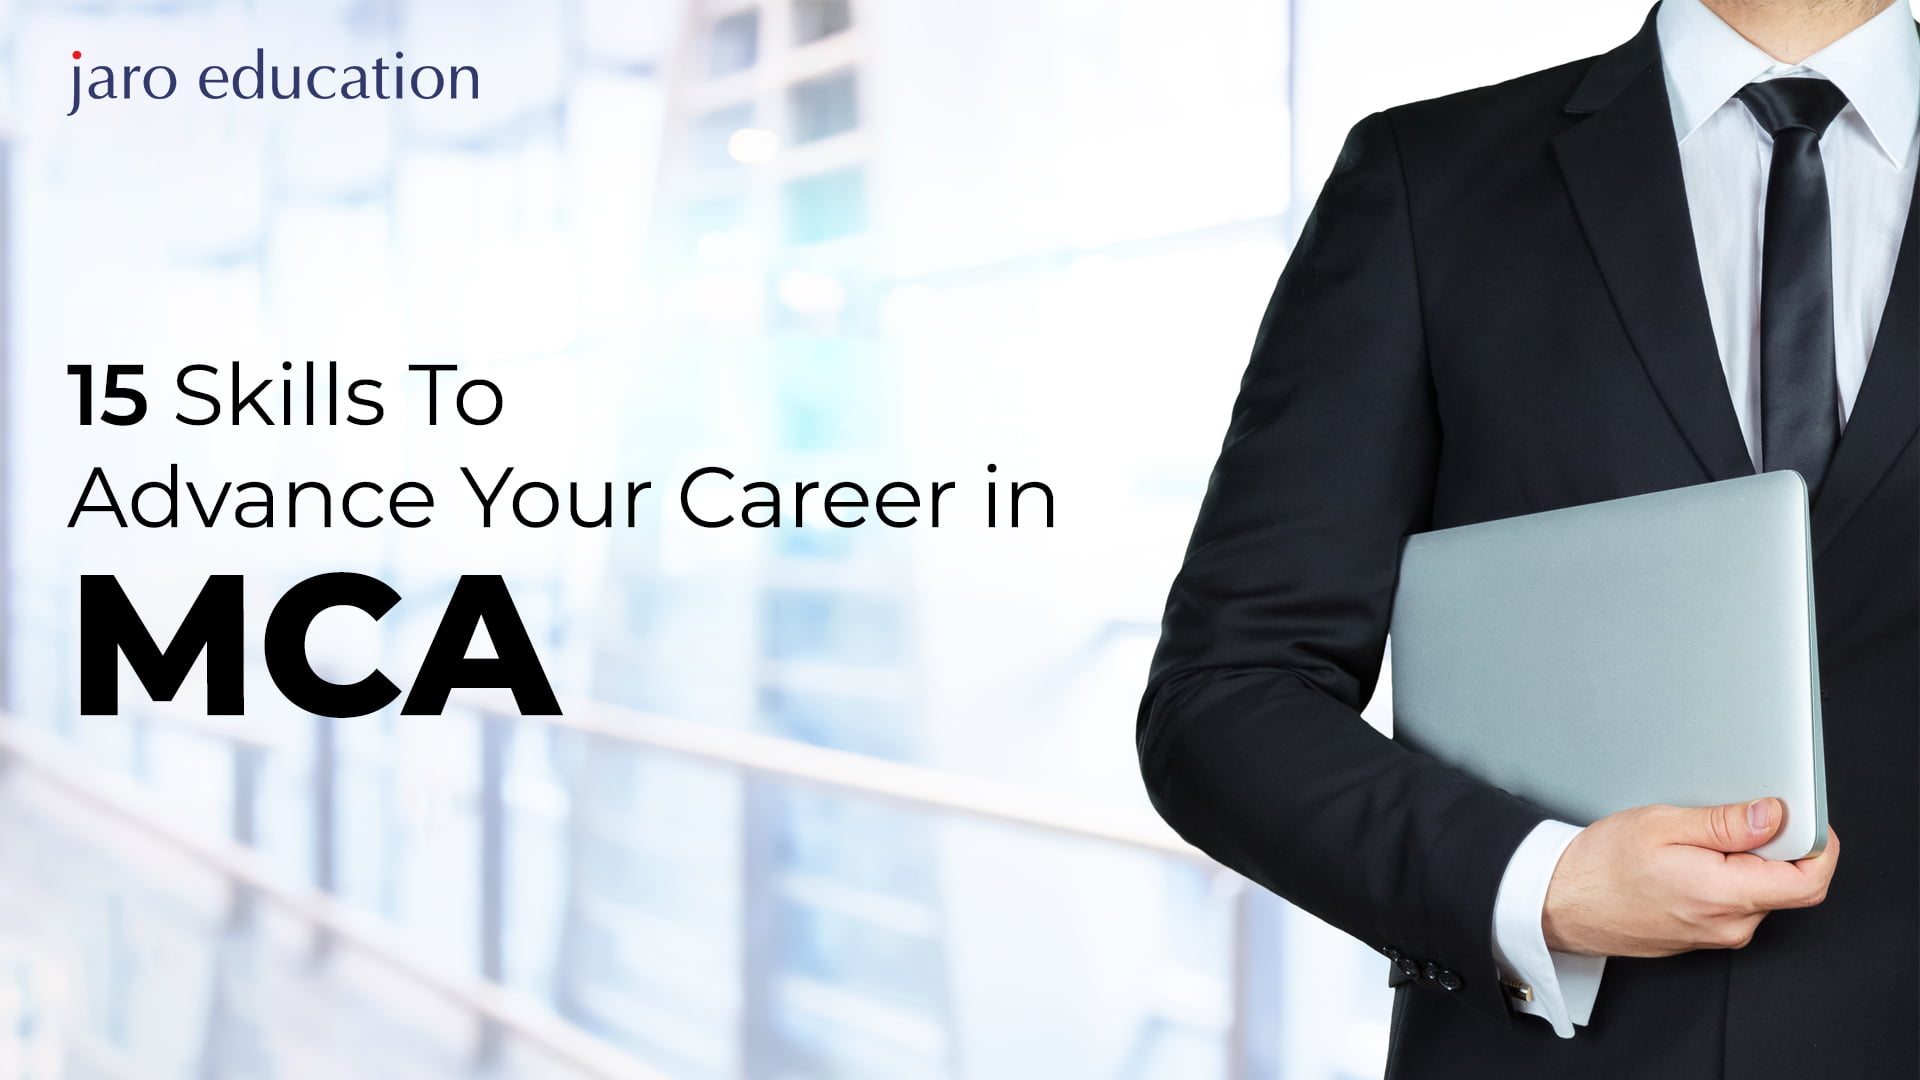 15 Skills To Advance Your Career in MCA jaro